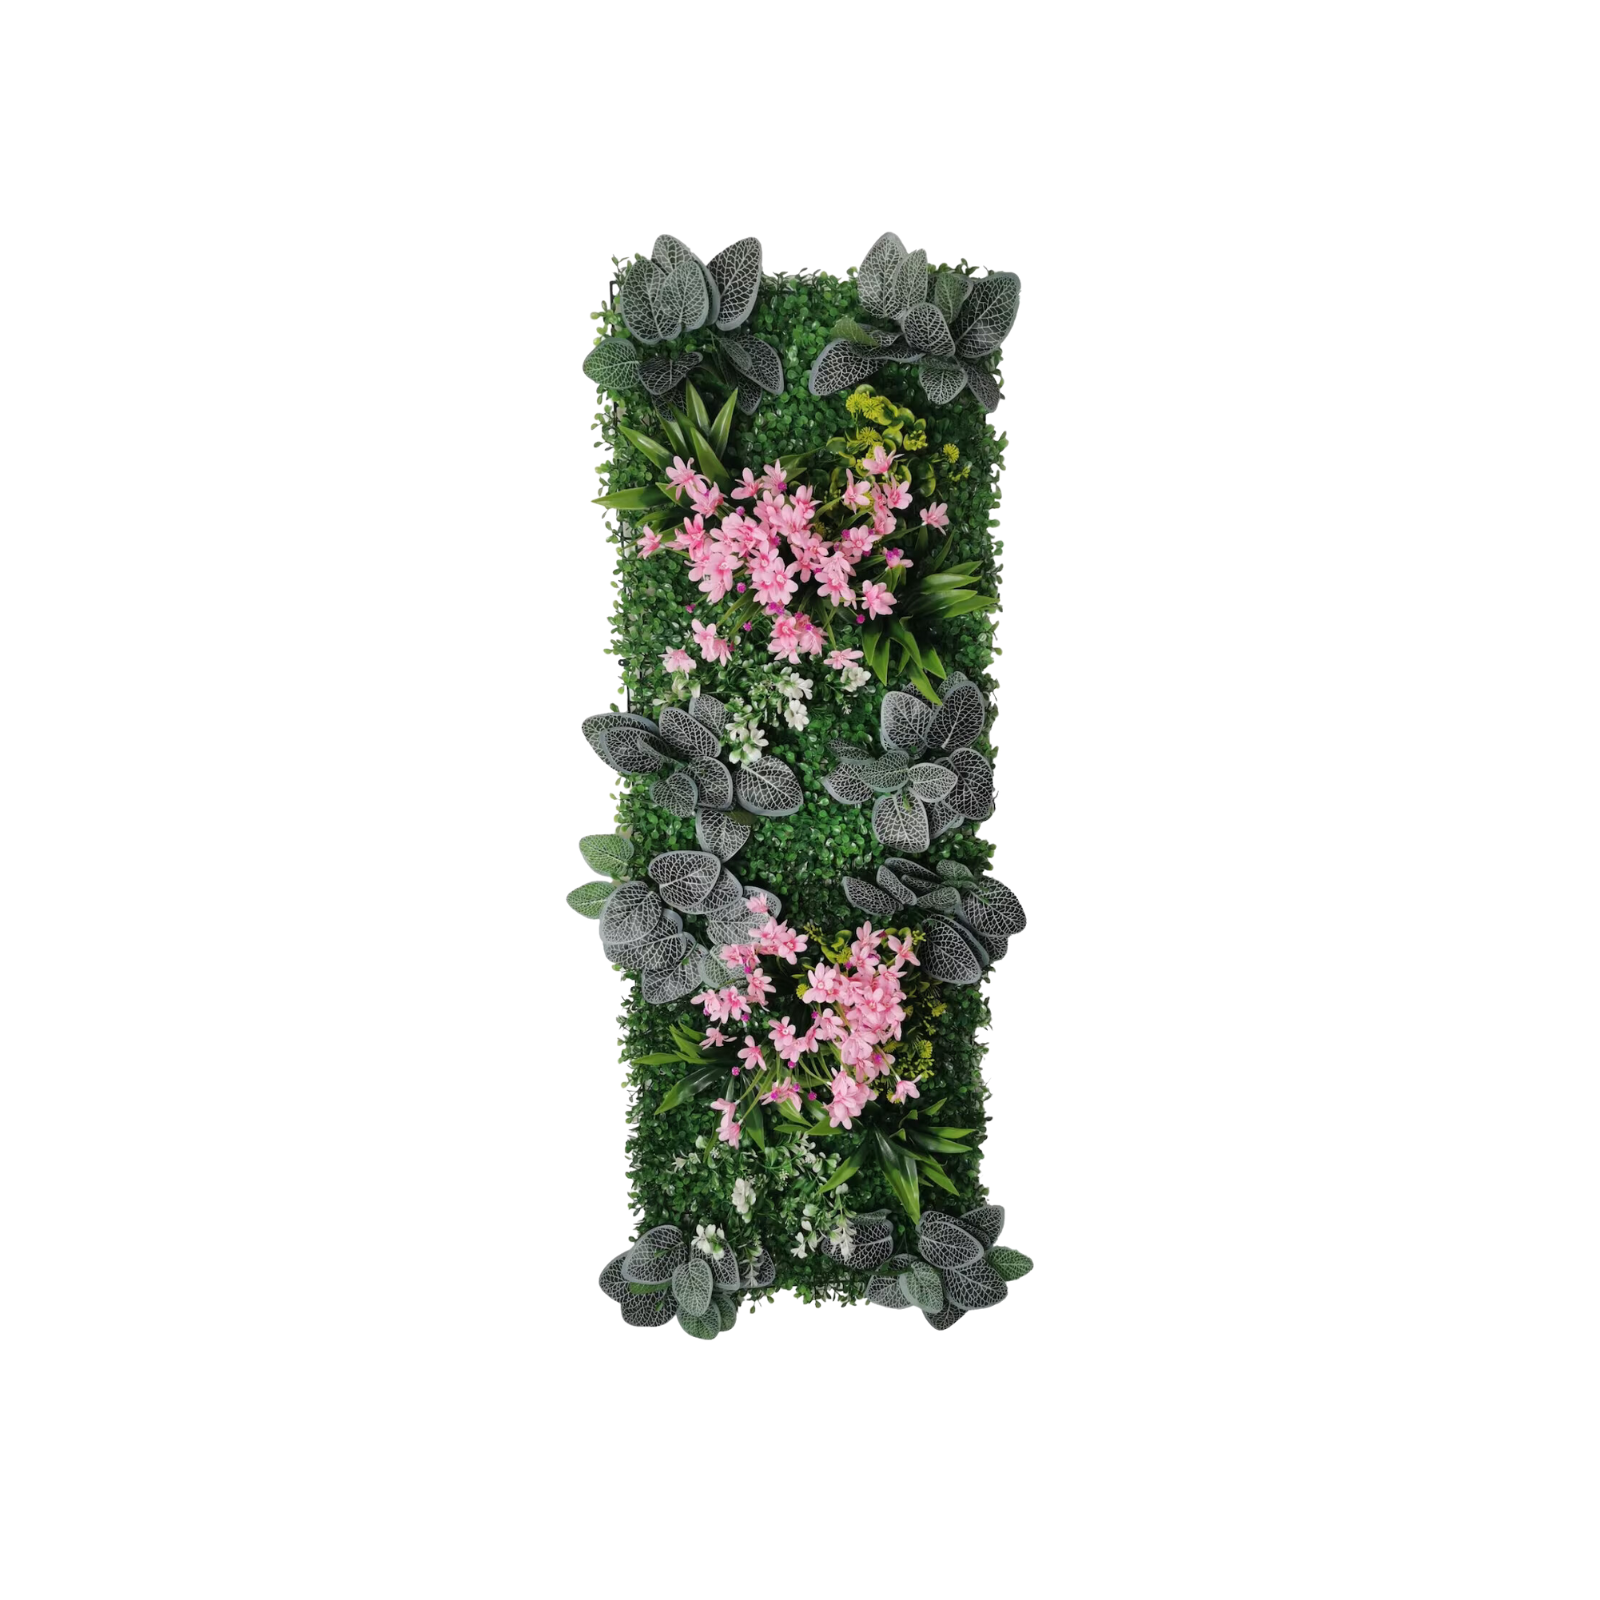 Decorative Plant Wall Artificial Lawn Subtropical Wall Panel Artificial Turf for Home Decor Office Bedroom 40Cm*120Cm